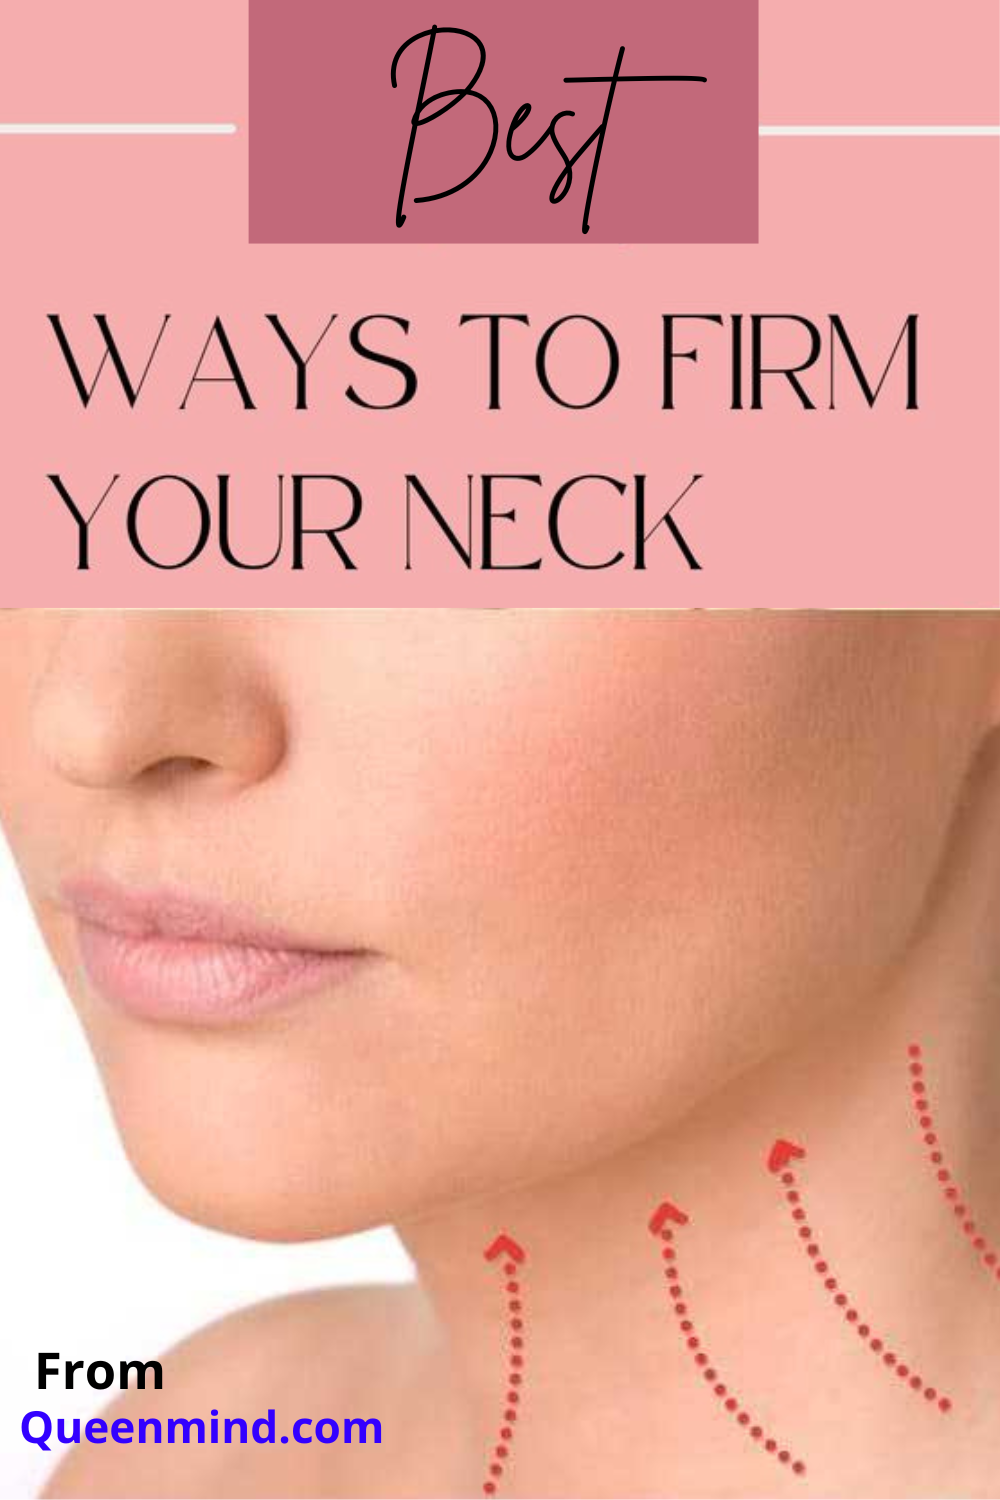 Want to know the best neck firming tips and tricks? Keep reading to find out! 